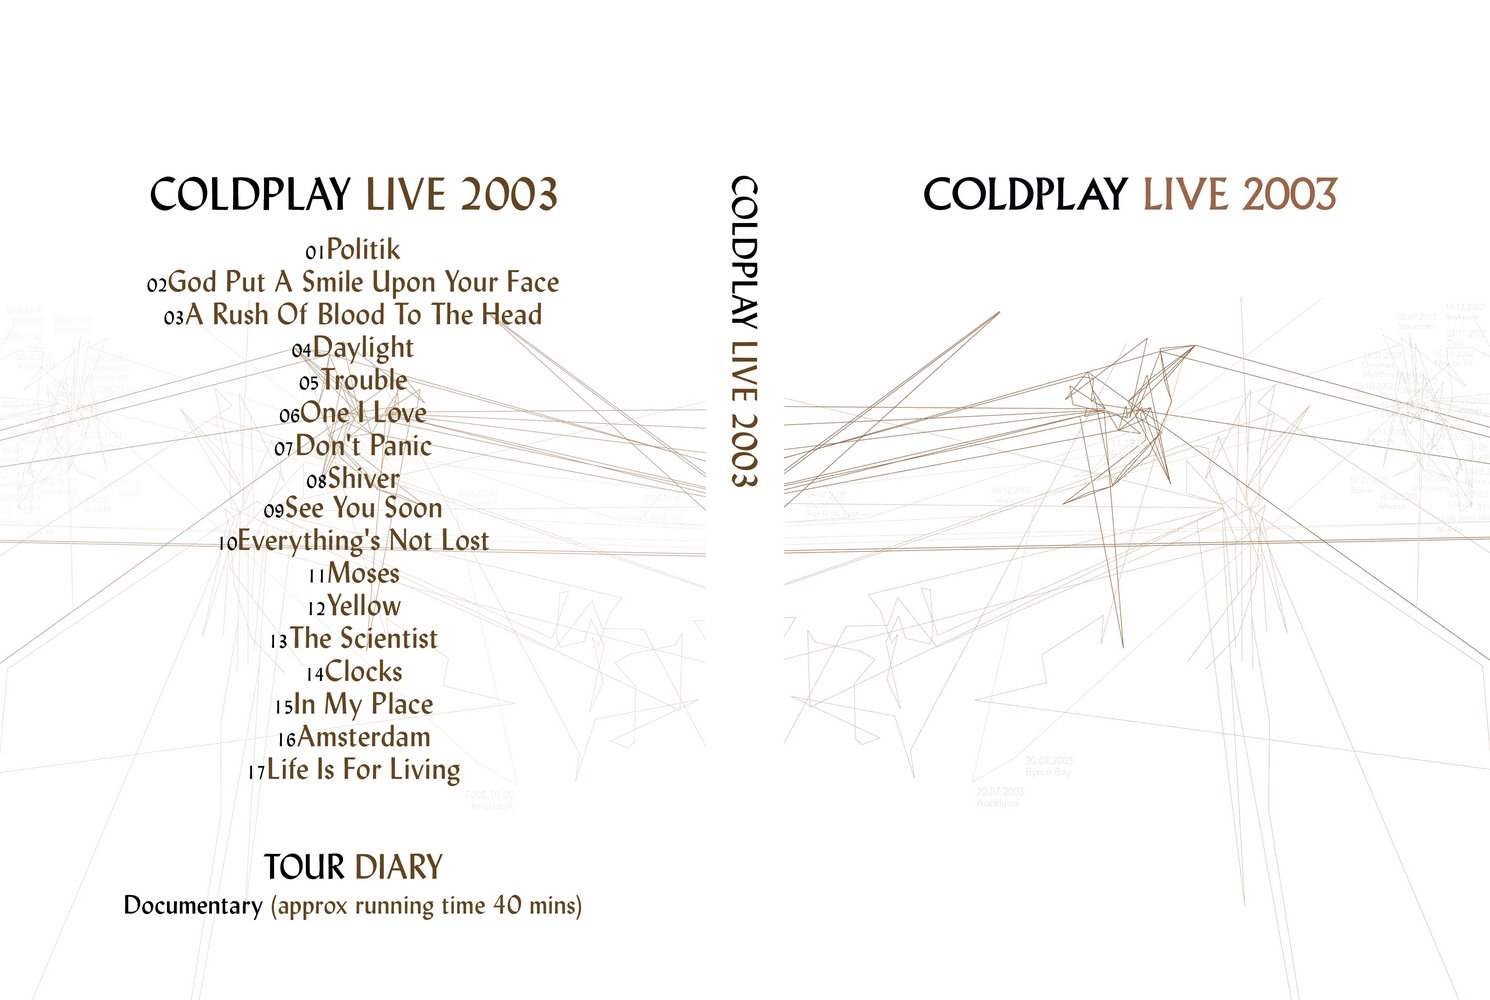 Jaquette DVD Coldplay - Live 2003